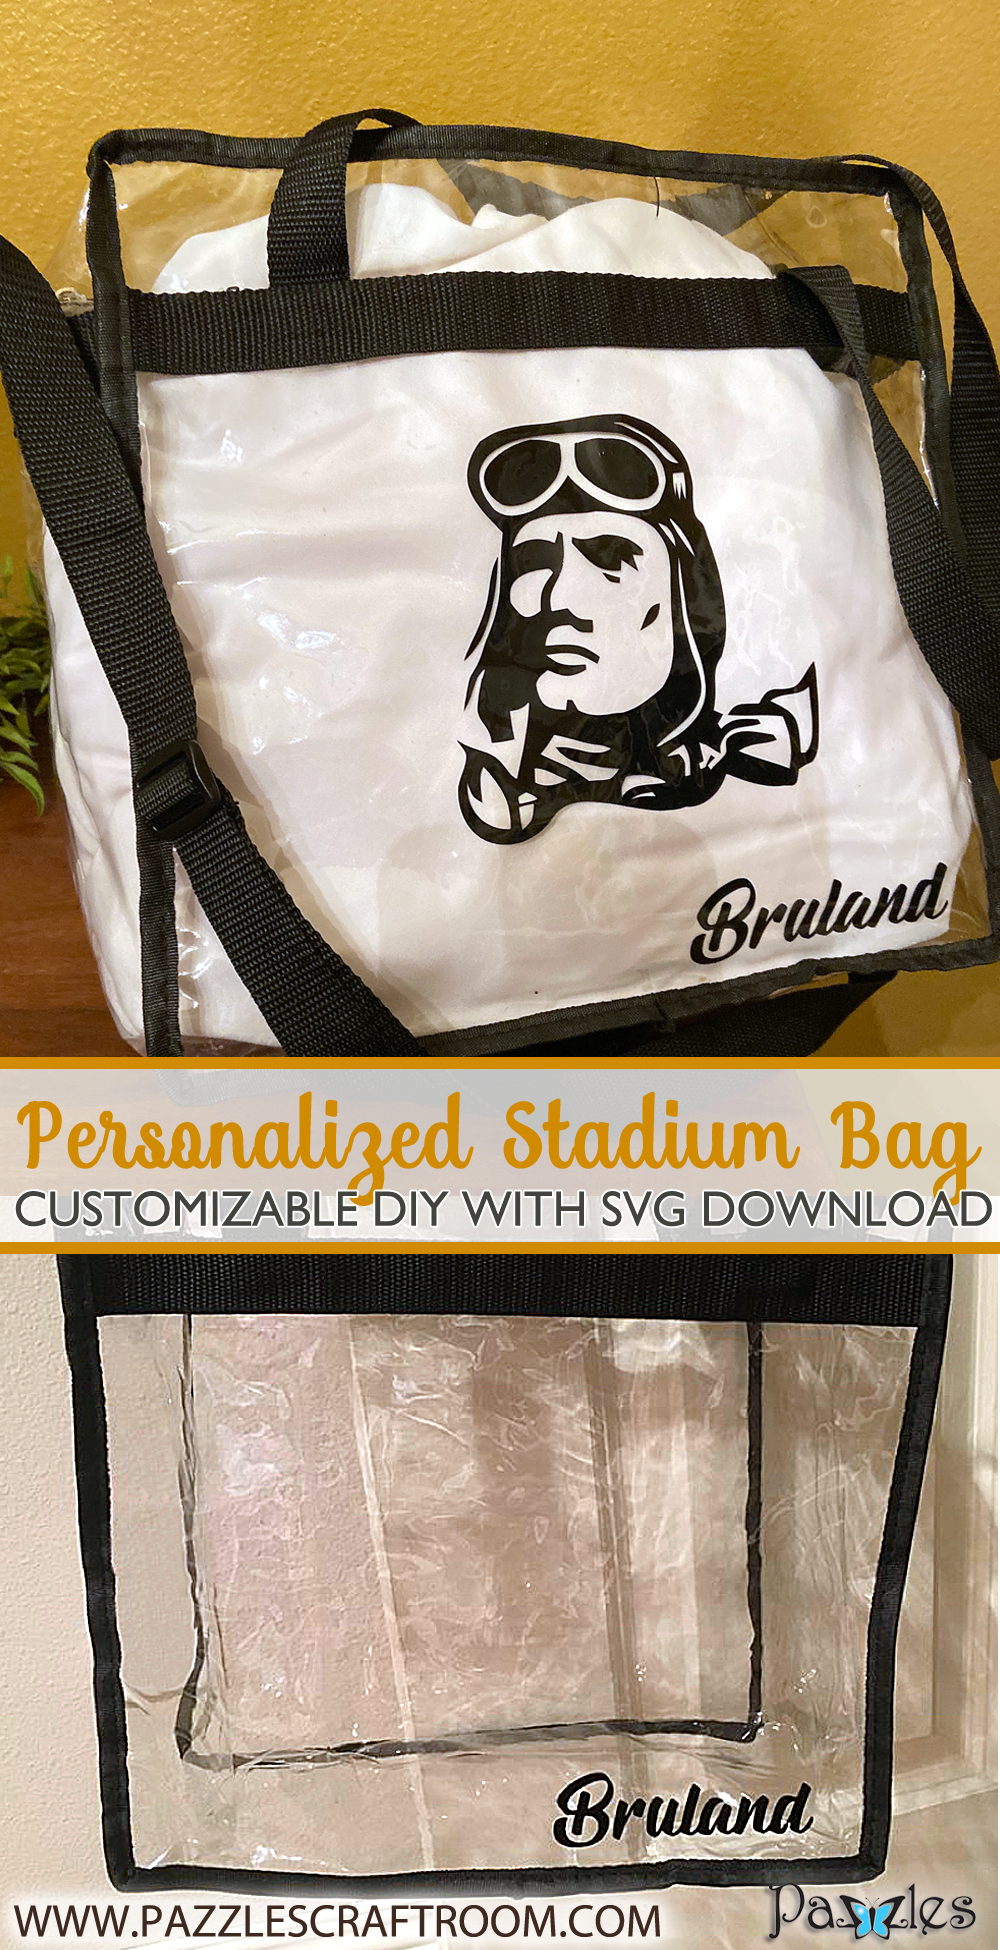 Pazzles Stadium DIY Custom Clear Bag with SVG download by Sara Weber. Compatible with all major electronic cutters including Pazzles Inspiration, Cricut, and Silhouette Cameo.